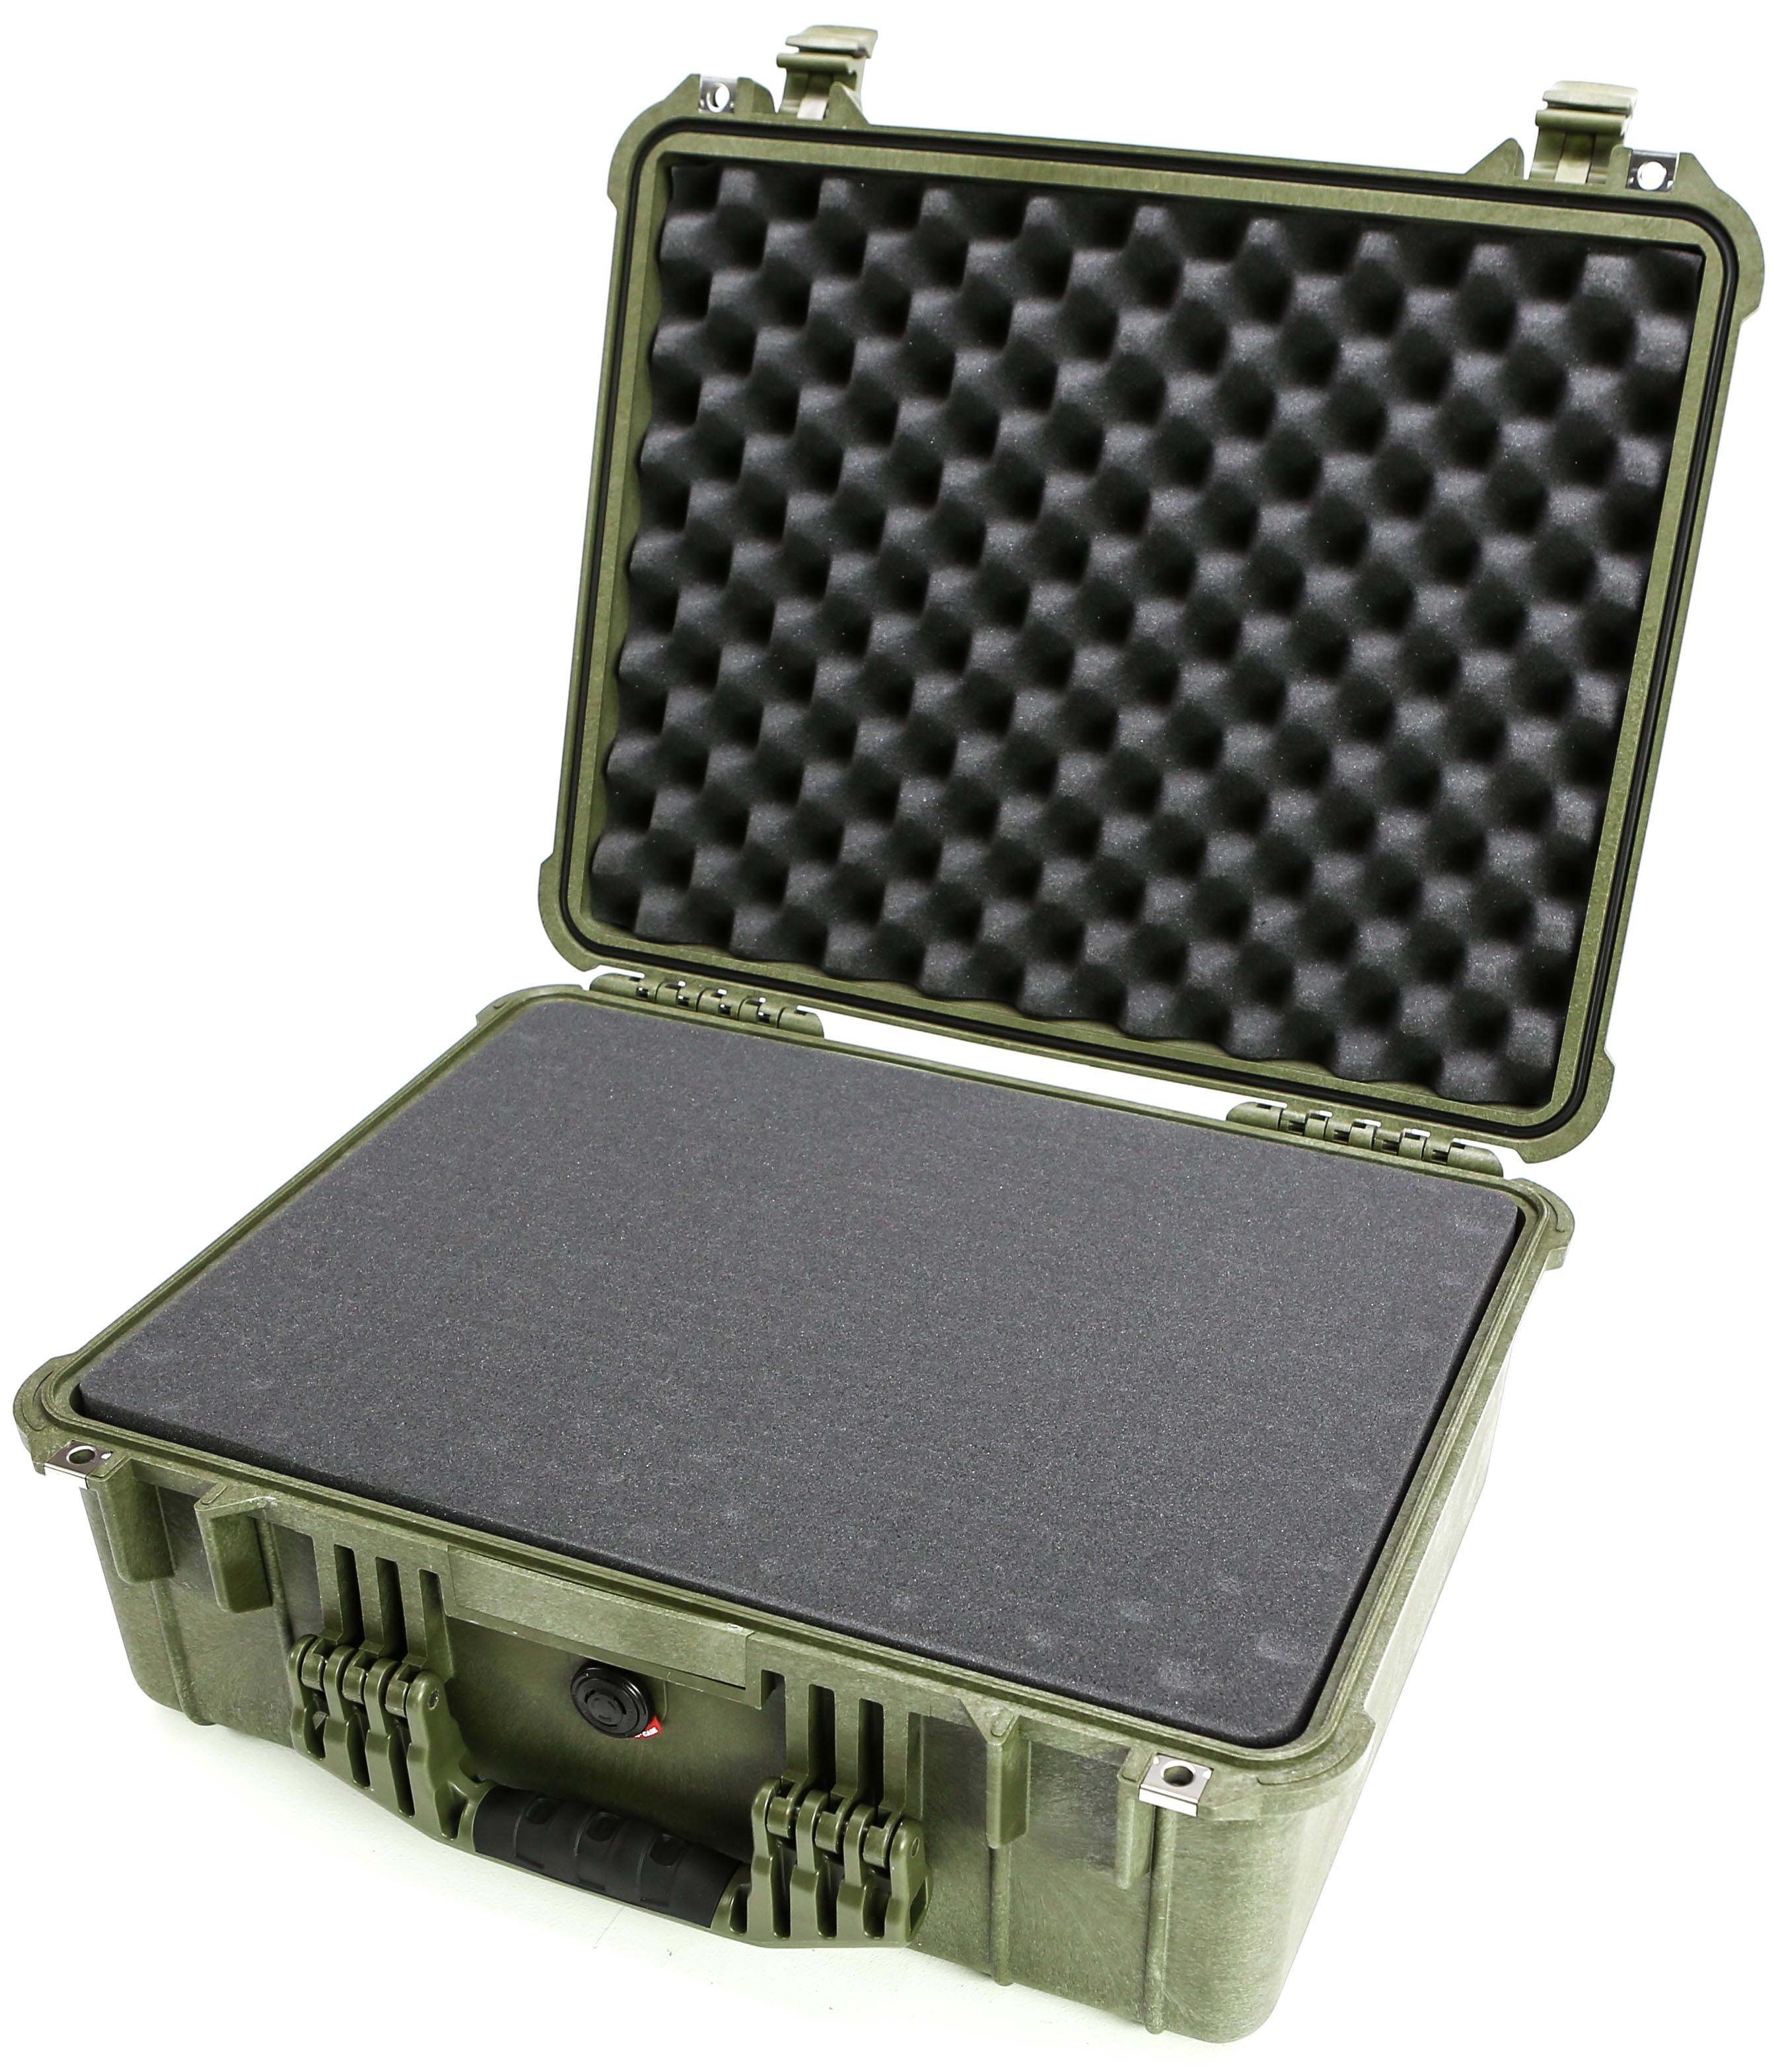 Pelican 1550 Case (Olive Drab Green)